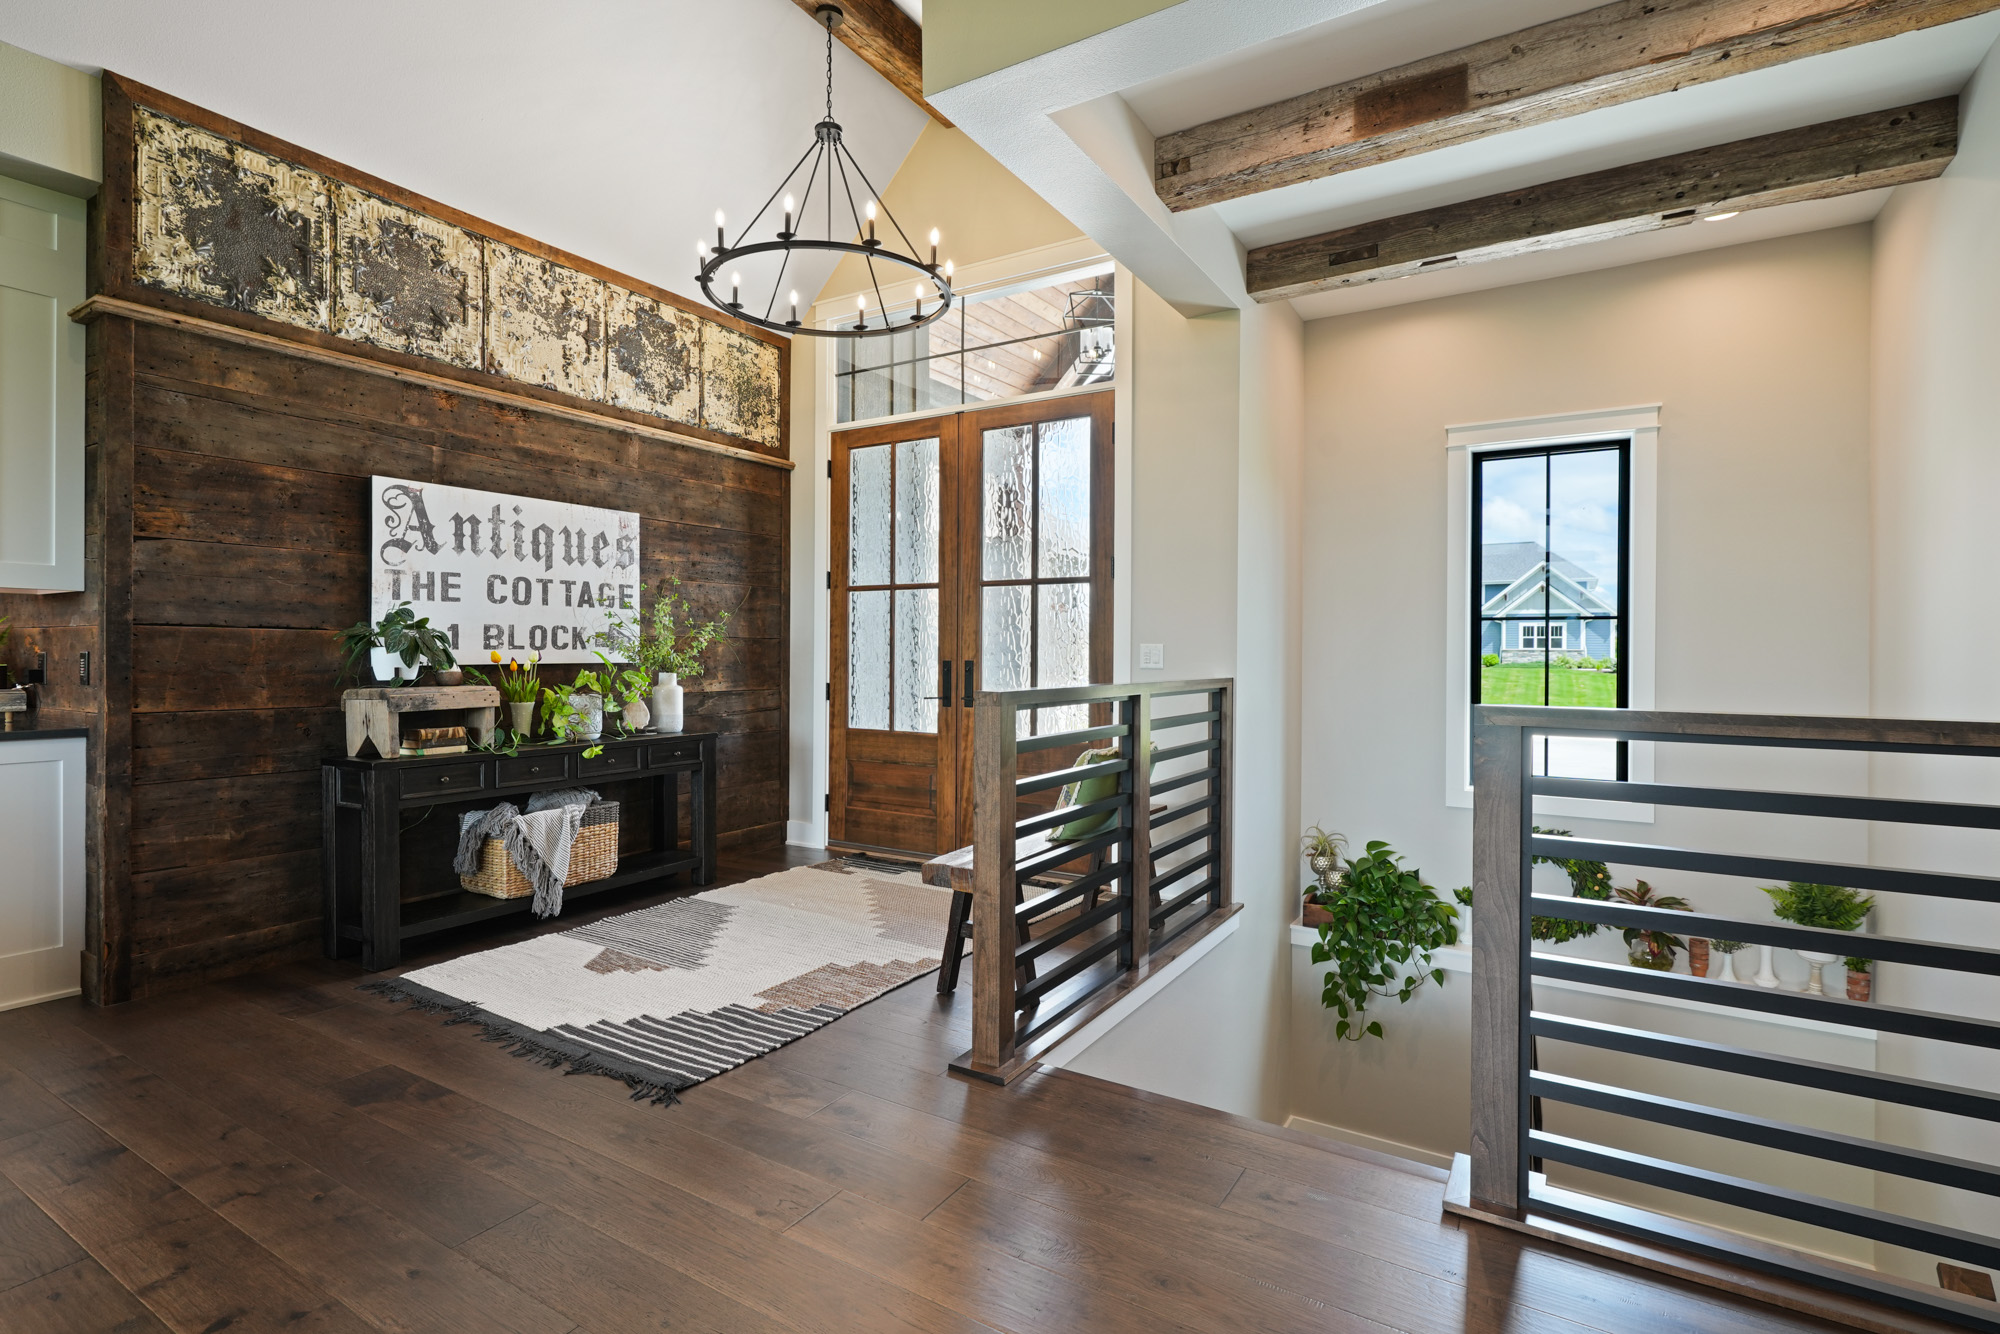 the inside of a custom build home, an entrance with bright lighting and wooden features.